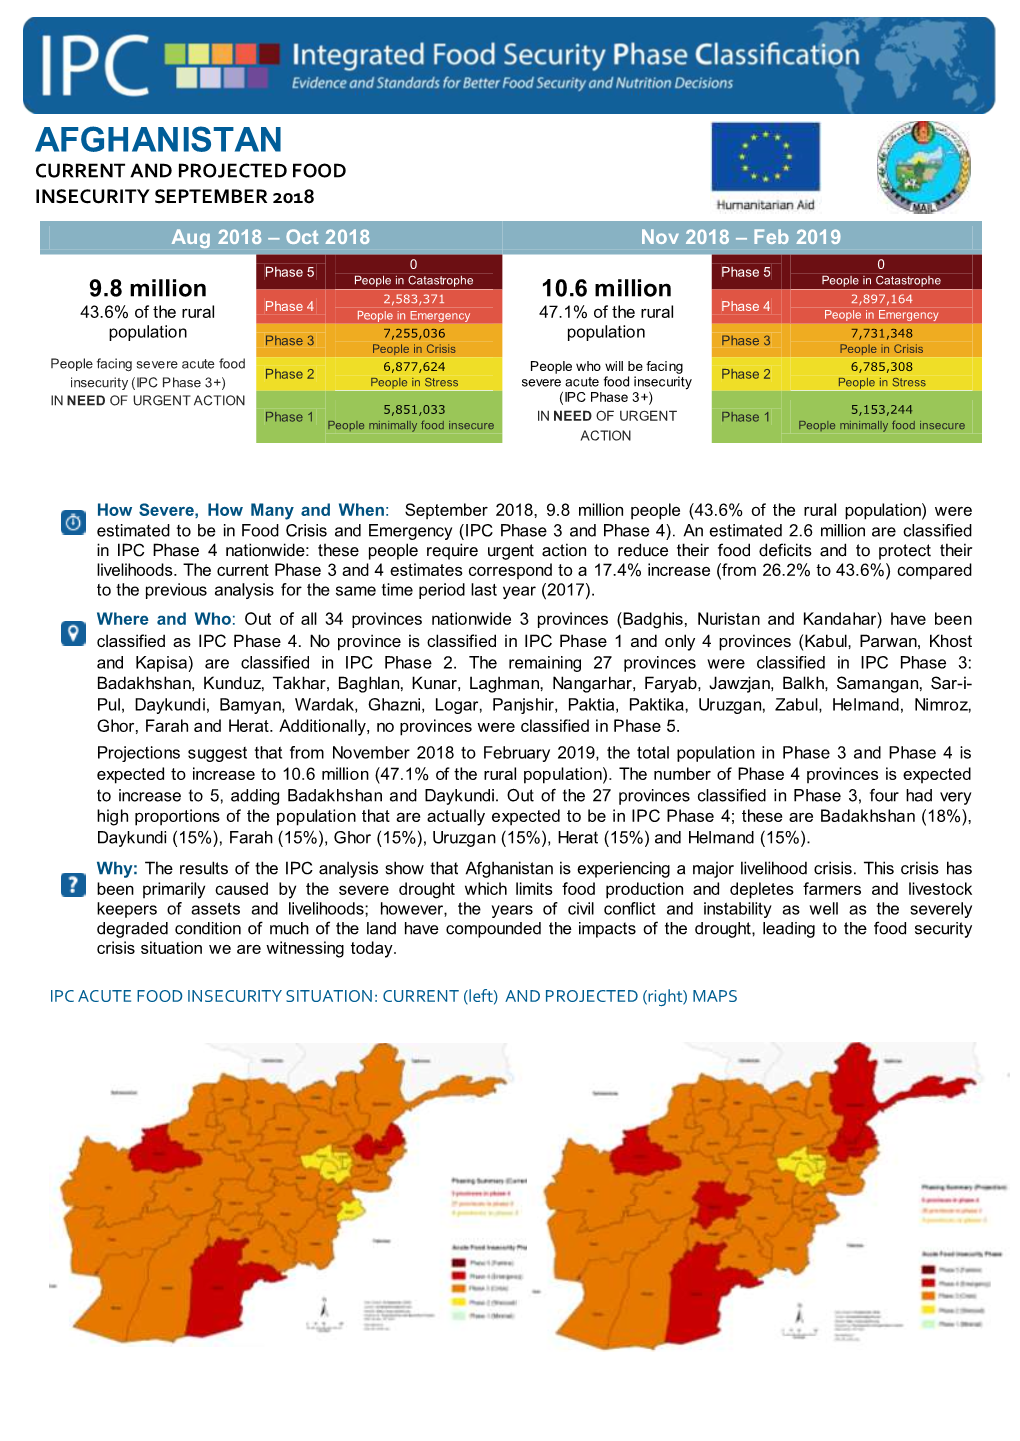 AFGHANISTAN SEPTEMBER 2018 – Projection Until FEBRUARY 2019 YEAR Report # 0000 | Issued in September 2018 ==